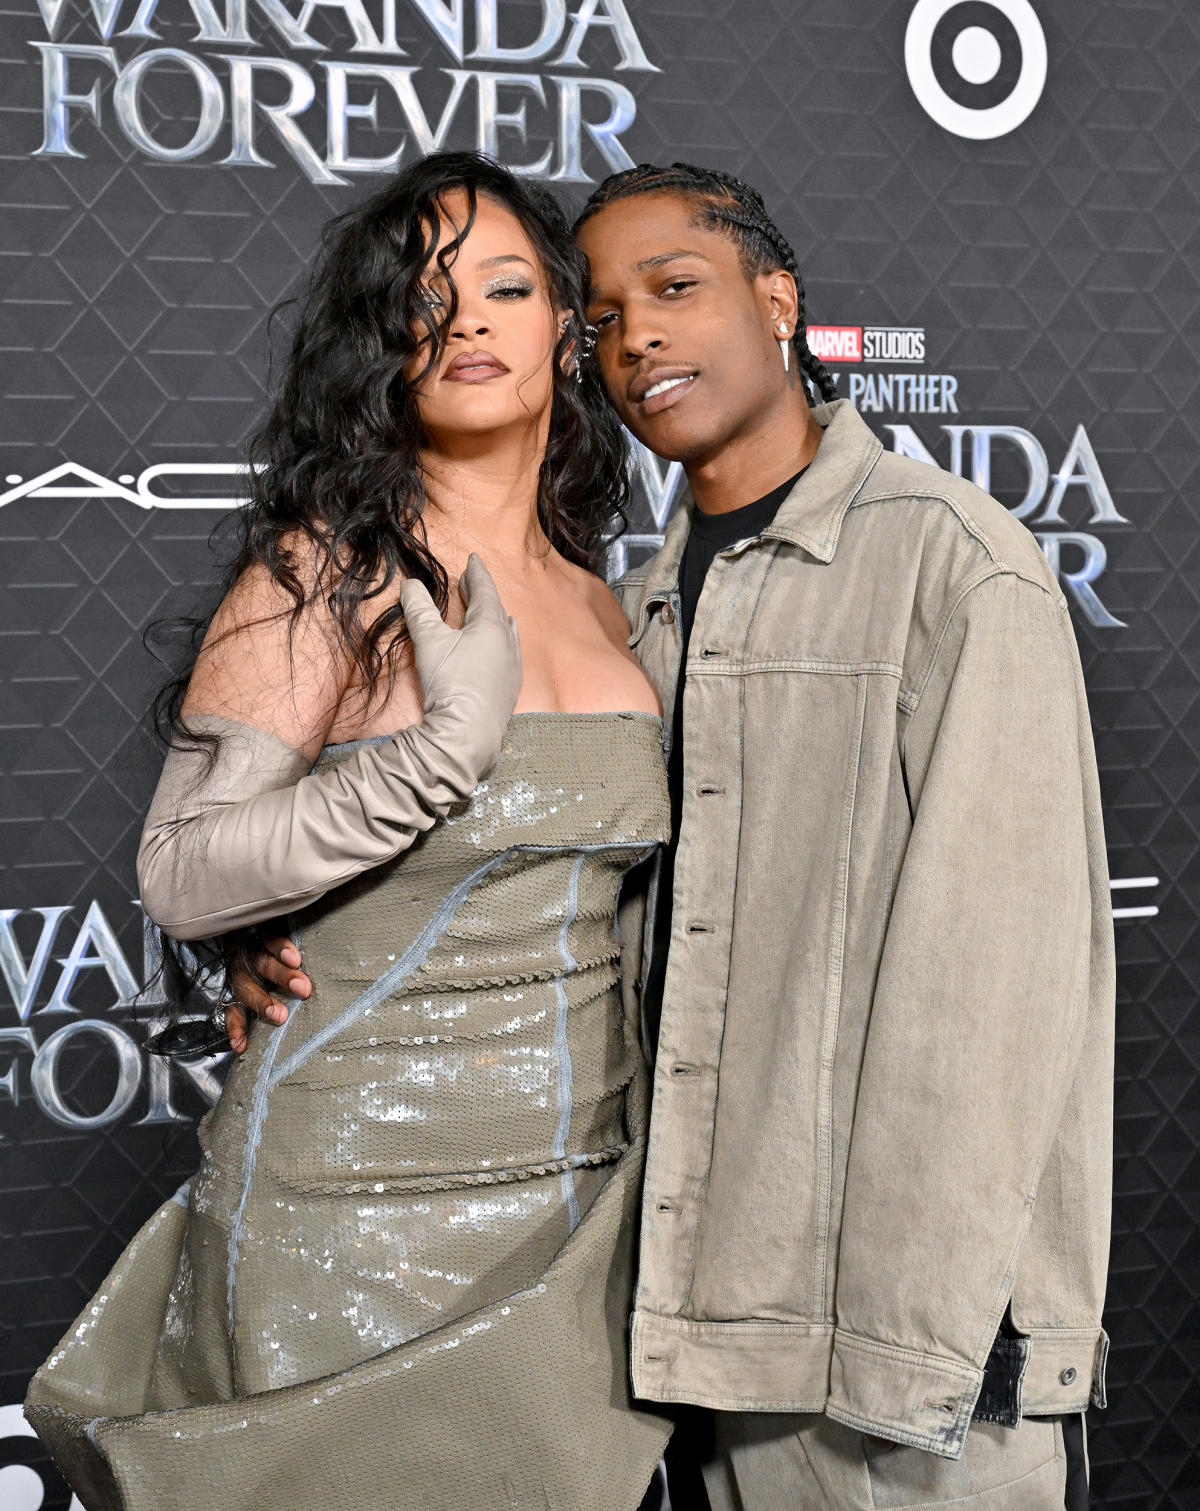 Rihanna and A$AP Rocky's relationship timeline, in their own words